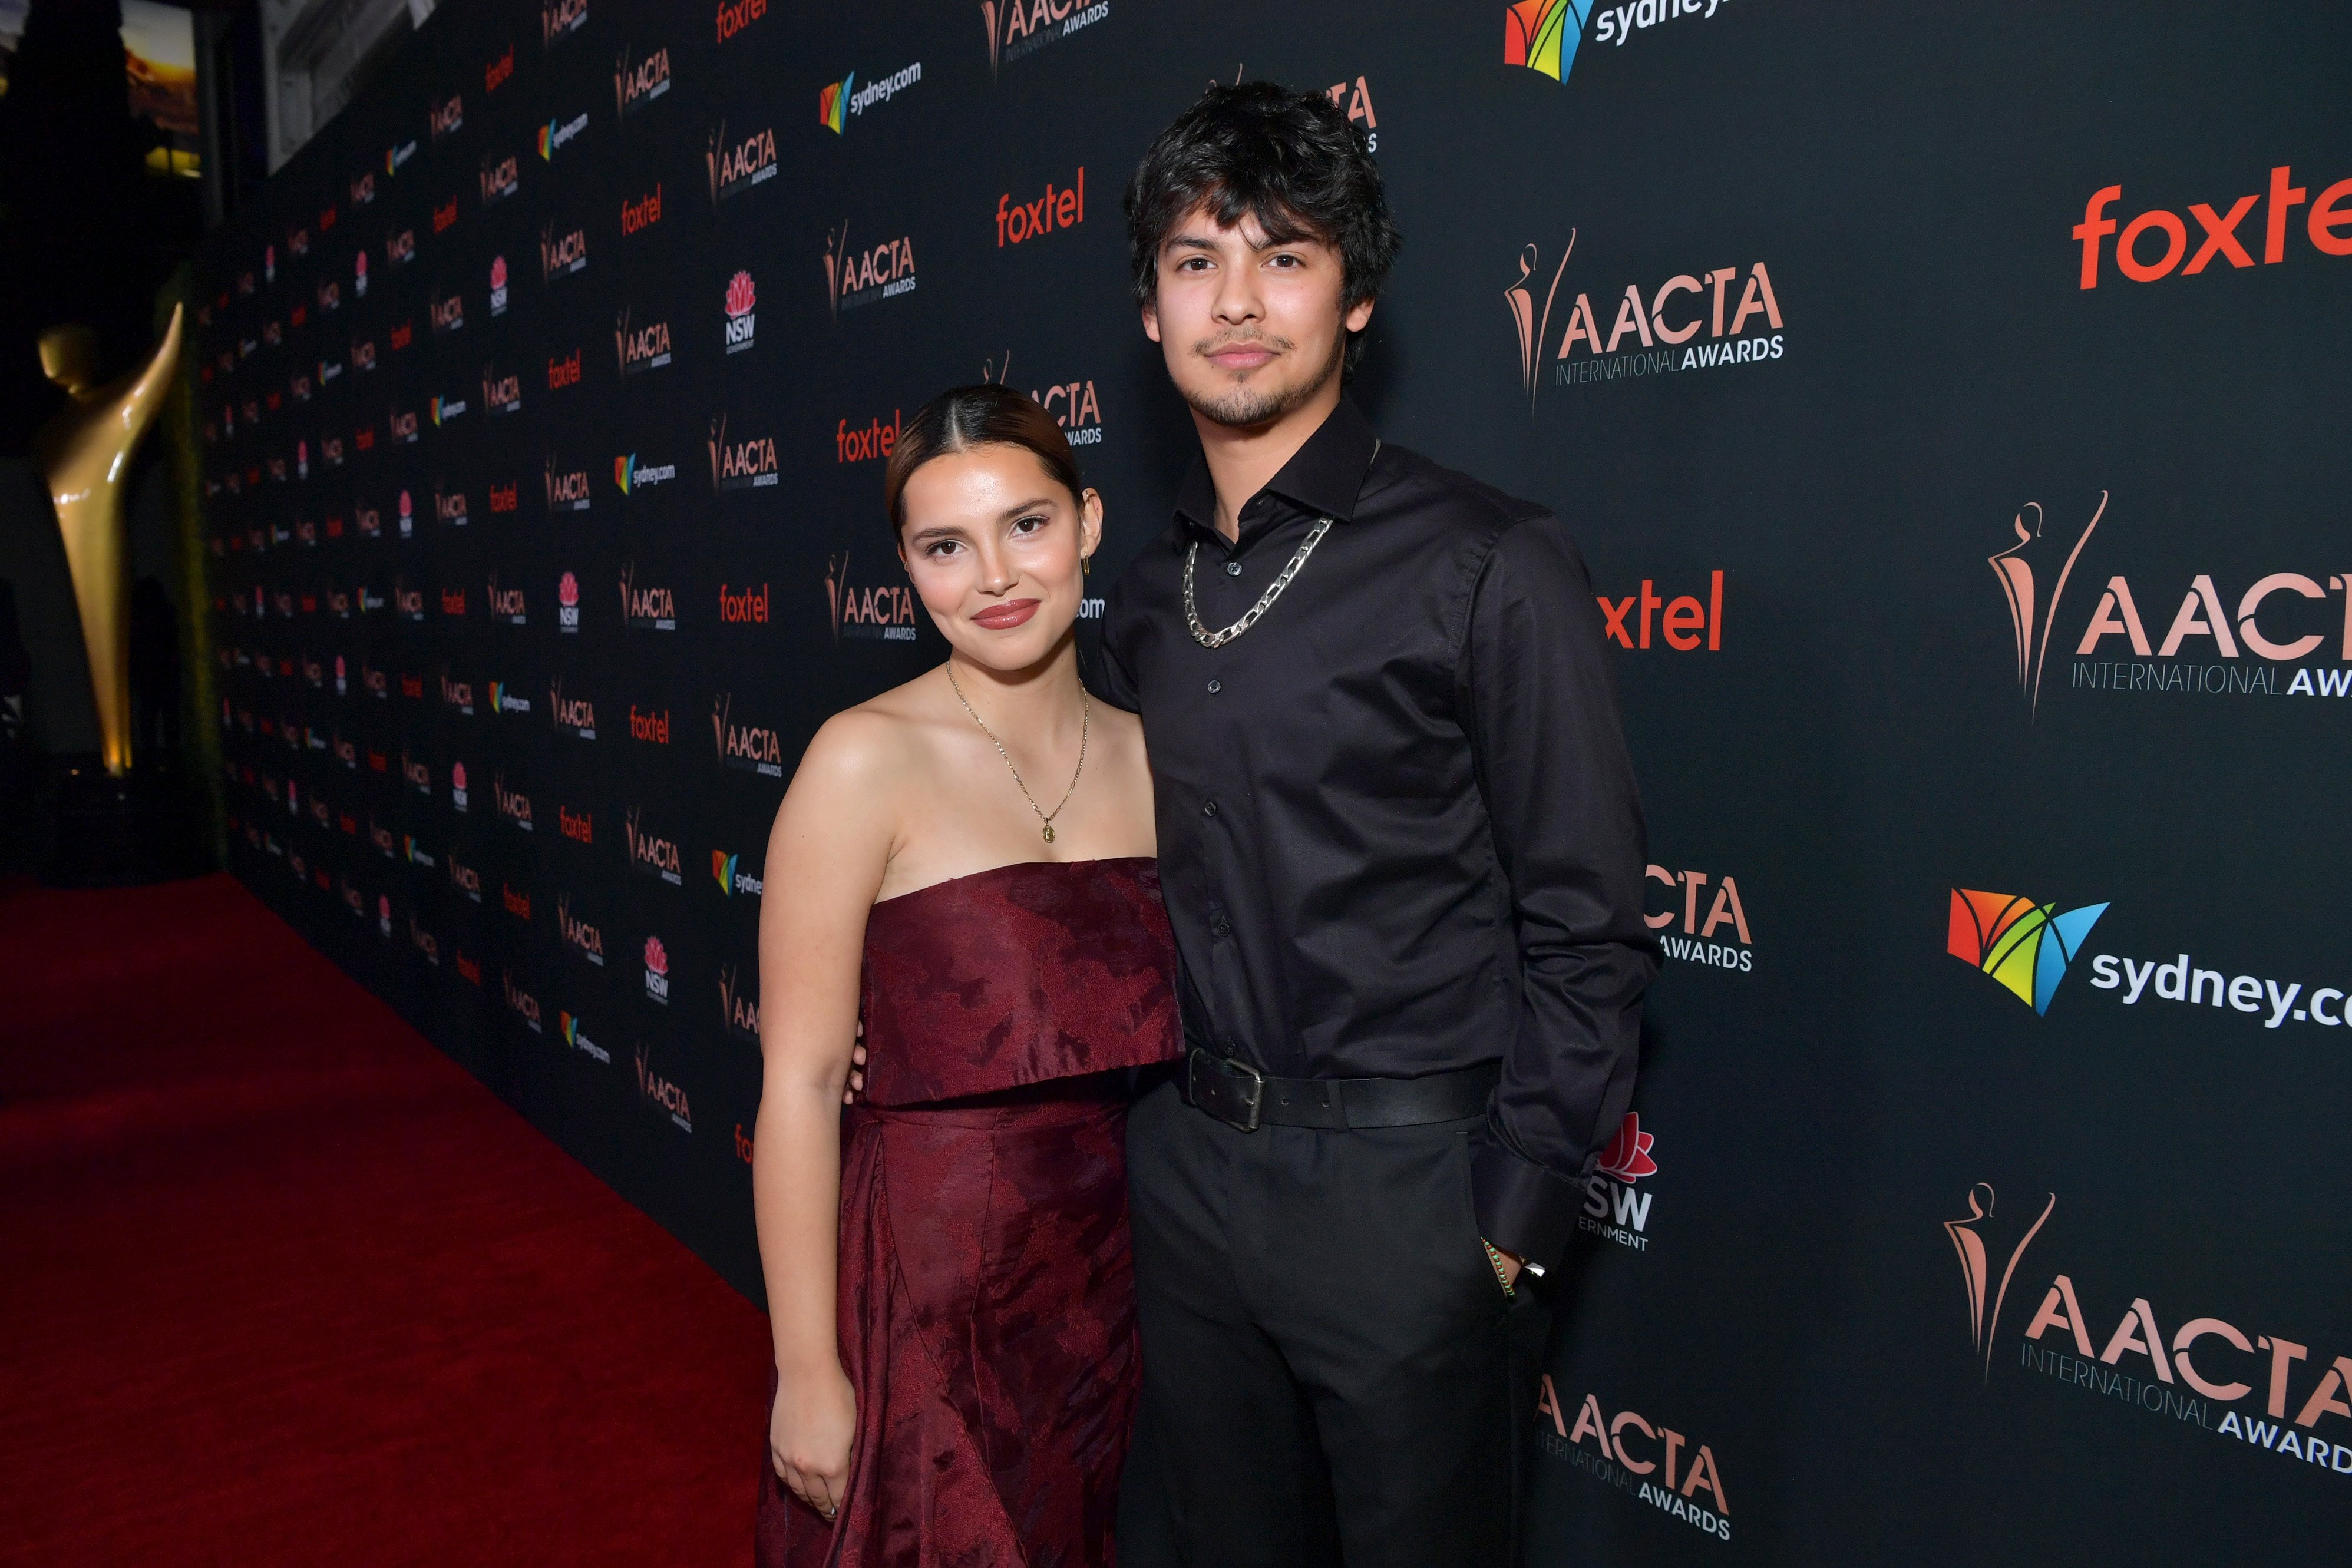  Inde Navarrette and Xolo Maridueña on January 03, 2020 in West Hollywood, California. | Source: Getty Images